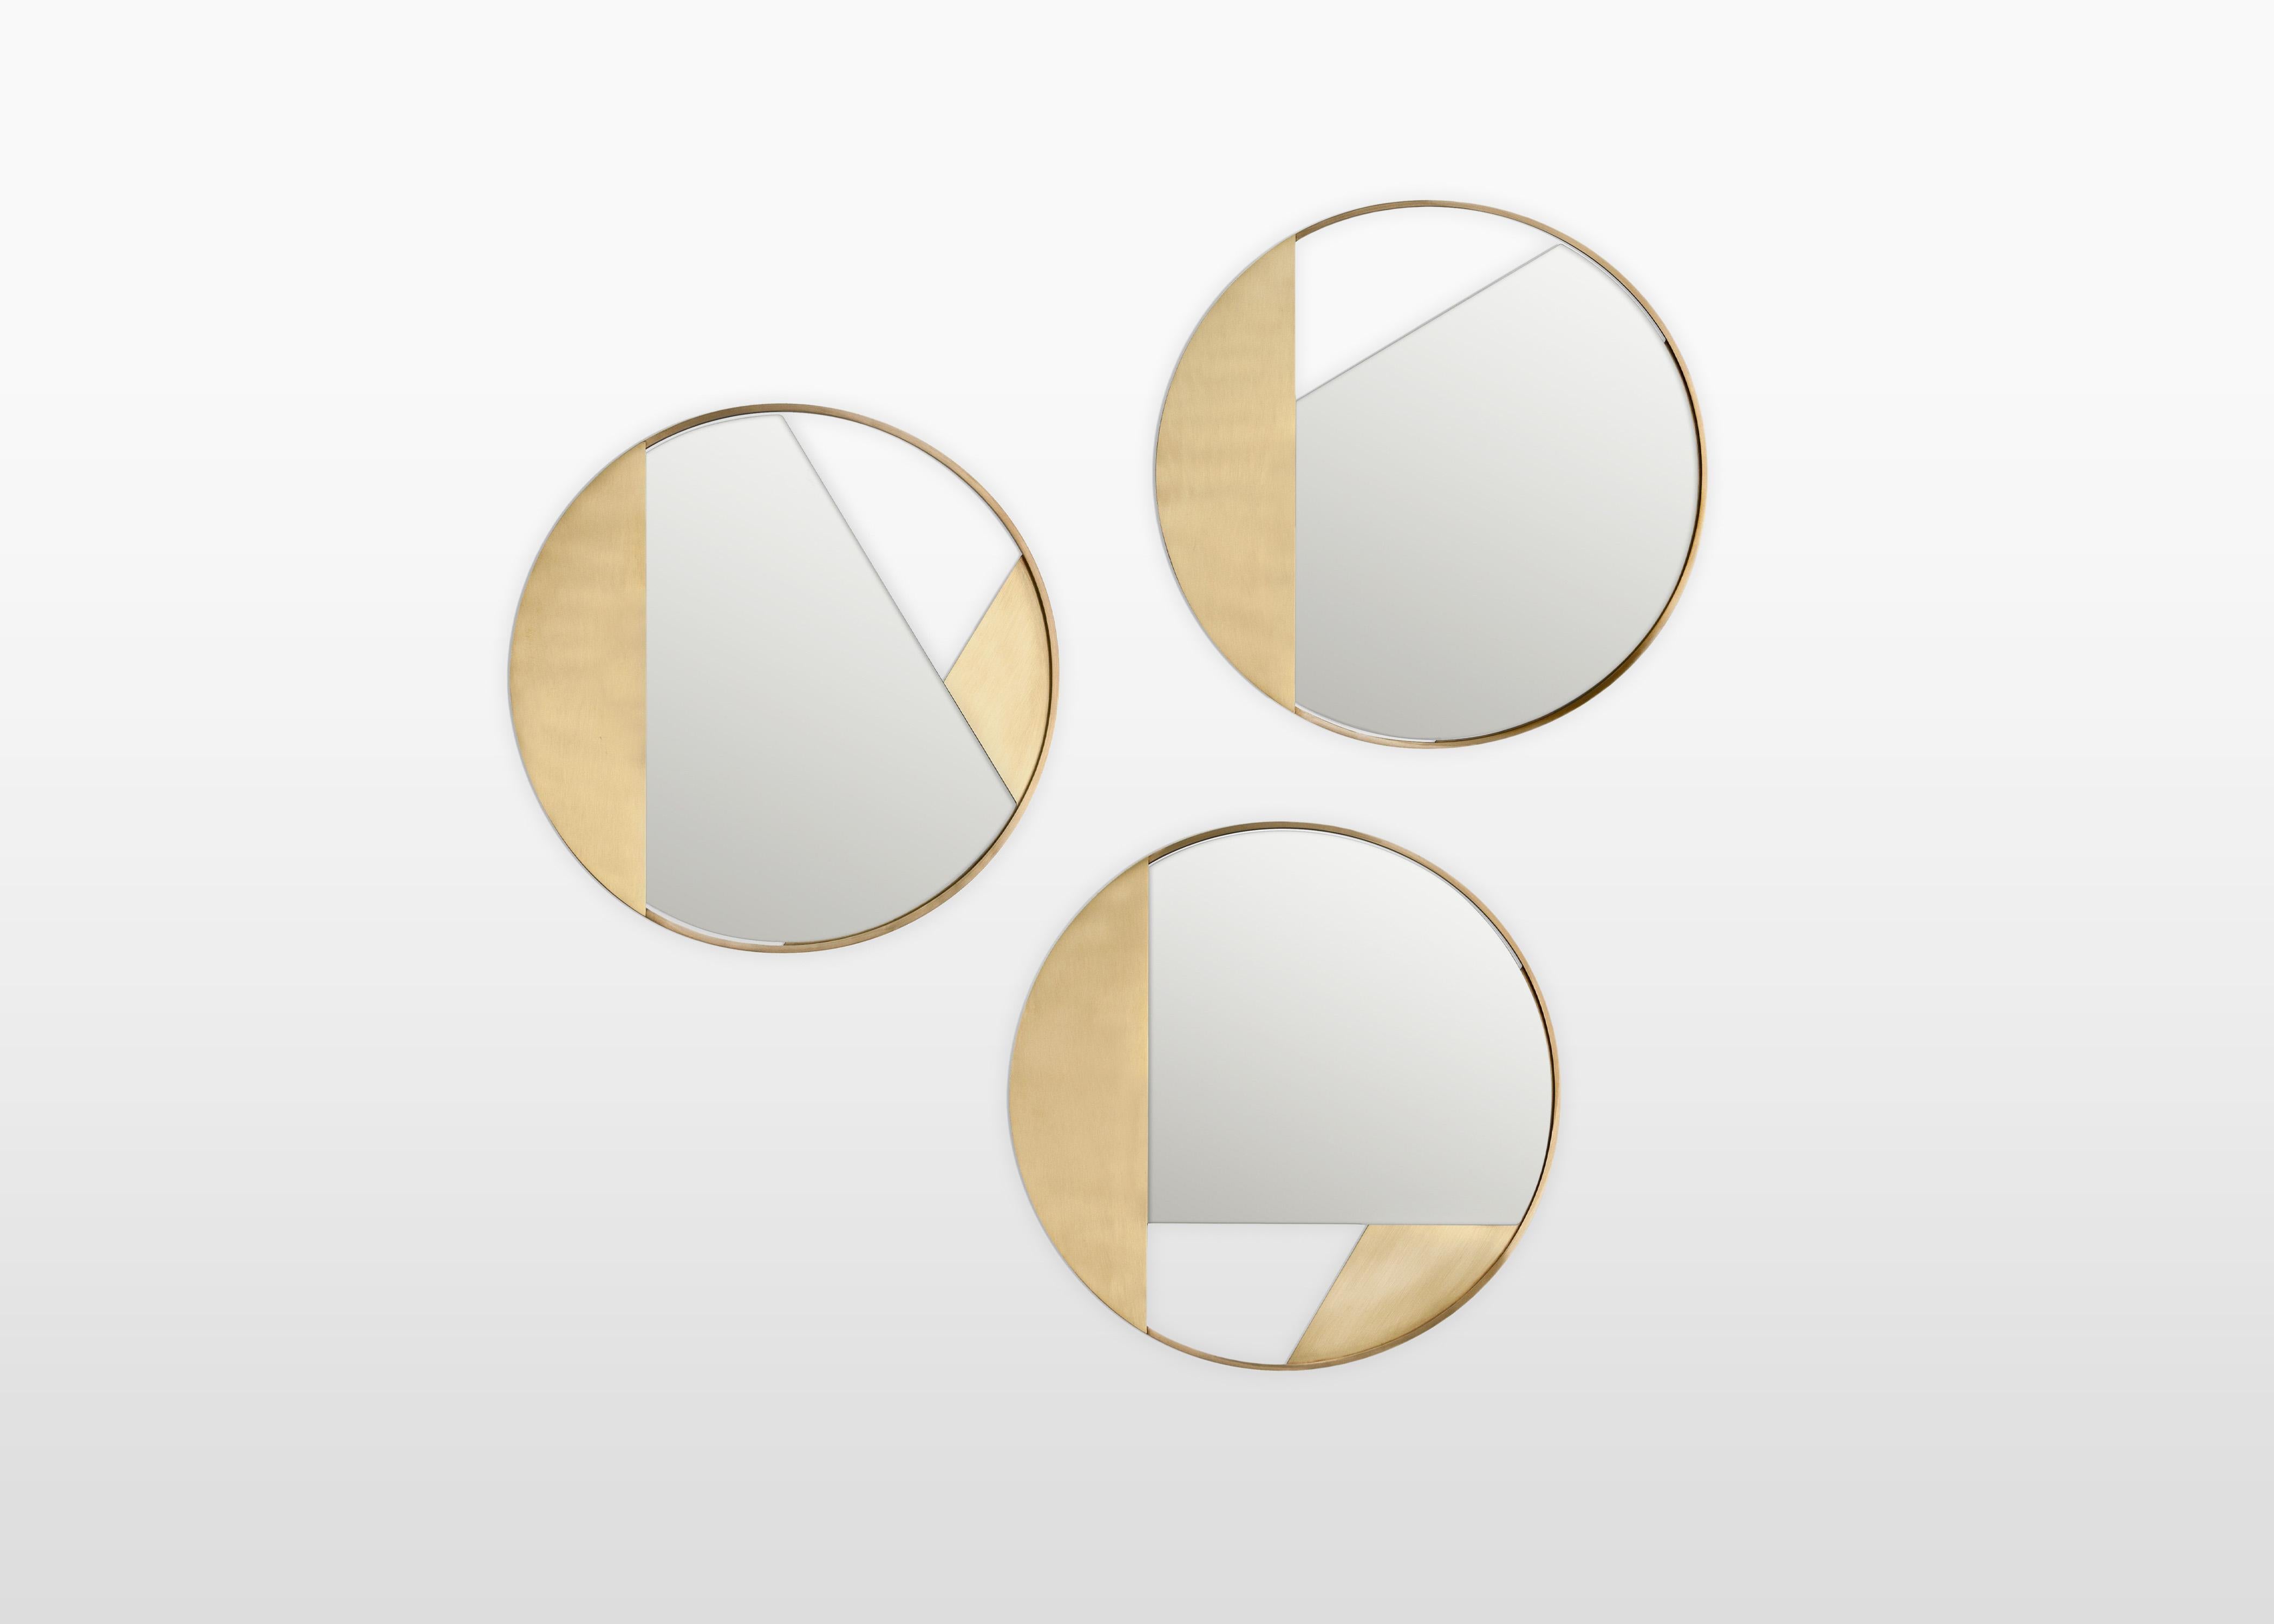 Set of 3 small brass edition mirror by Edizione Limitata
Limited Edition of 1000 pieces. Signed and numbered.
Designers: Simone Fanciullacci
Dimensions: Ø 53.5 cm
Materials: Brushed brass and mirror

Edizione Limitata, that is to say “Limited